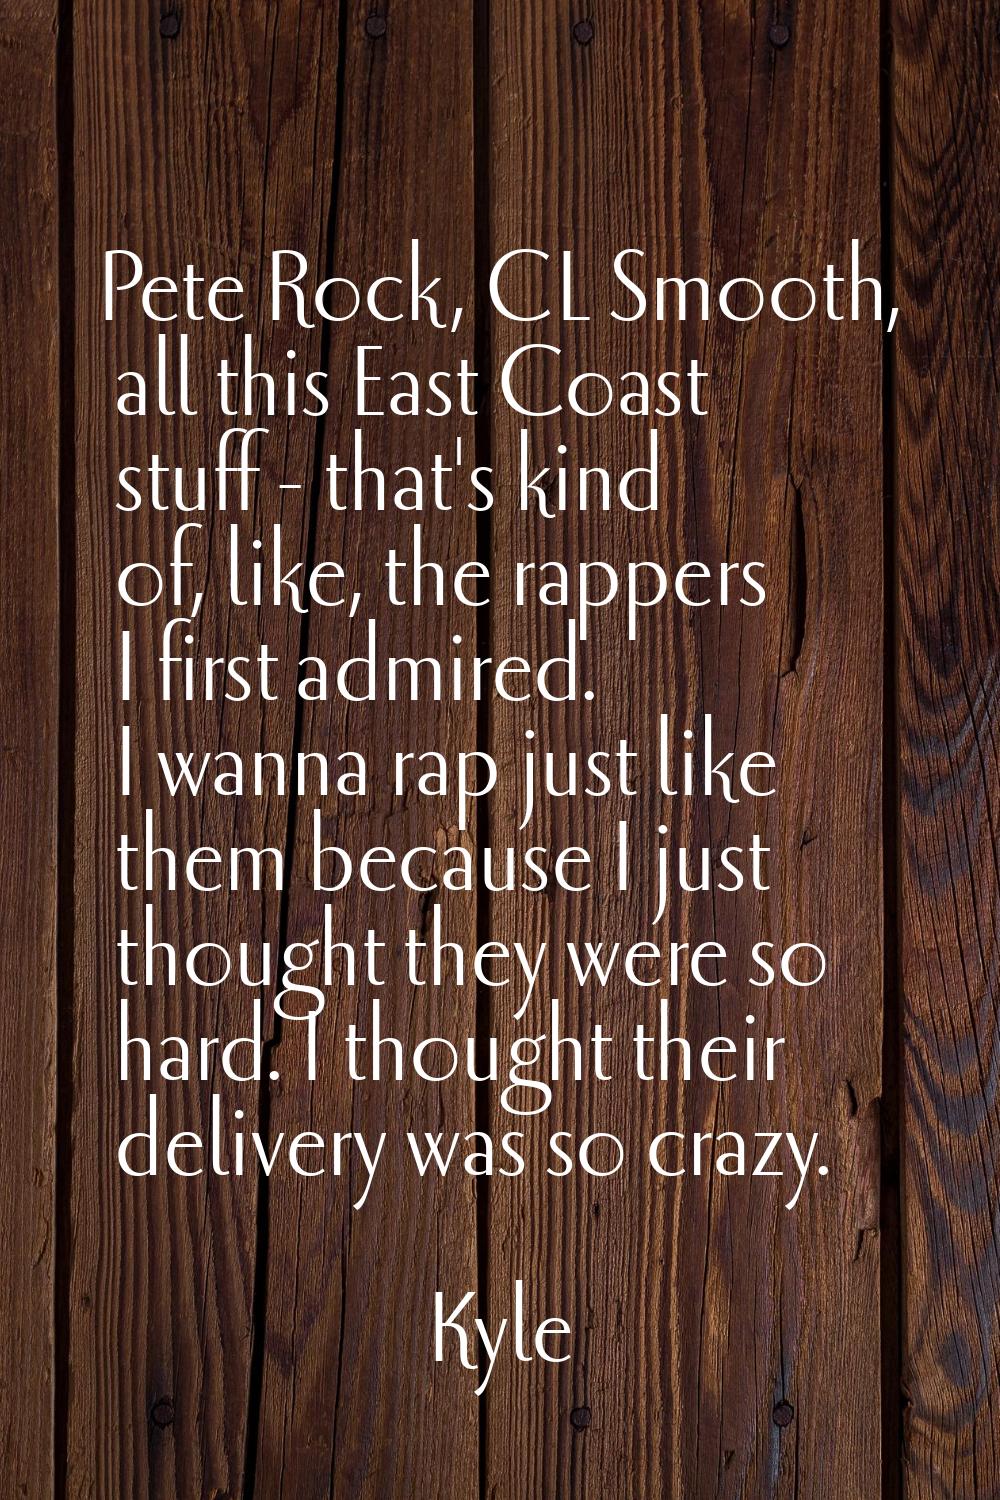 Pete Rock, CL Smooth, all this East Coast stuff - that's kind of, like, the rappers I first admired